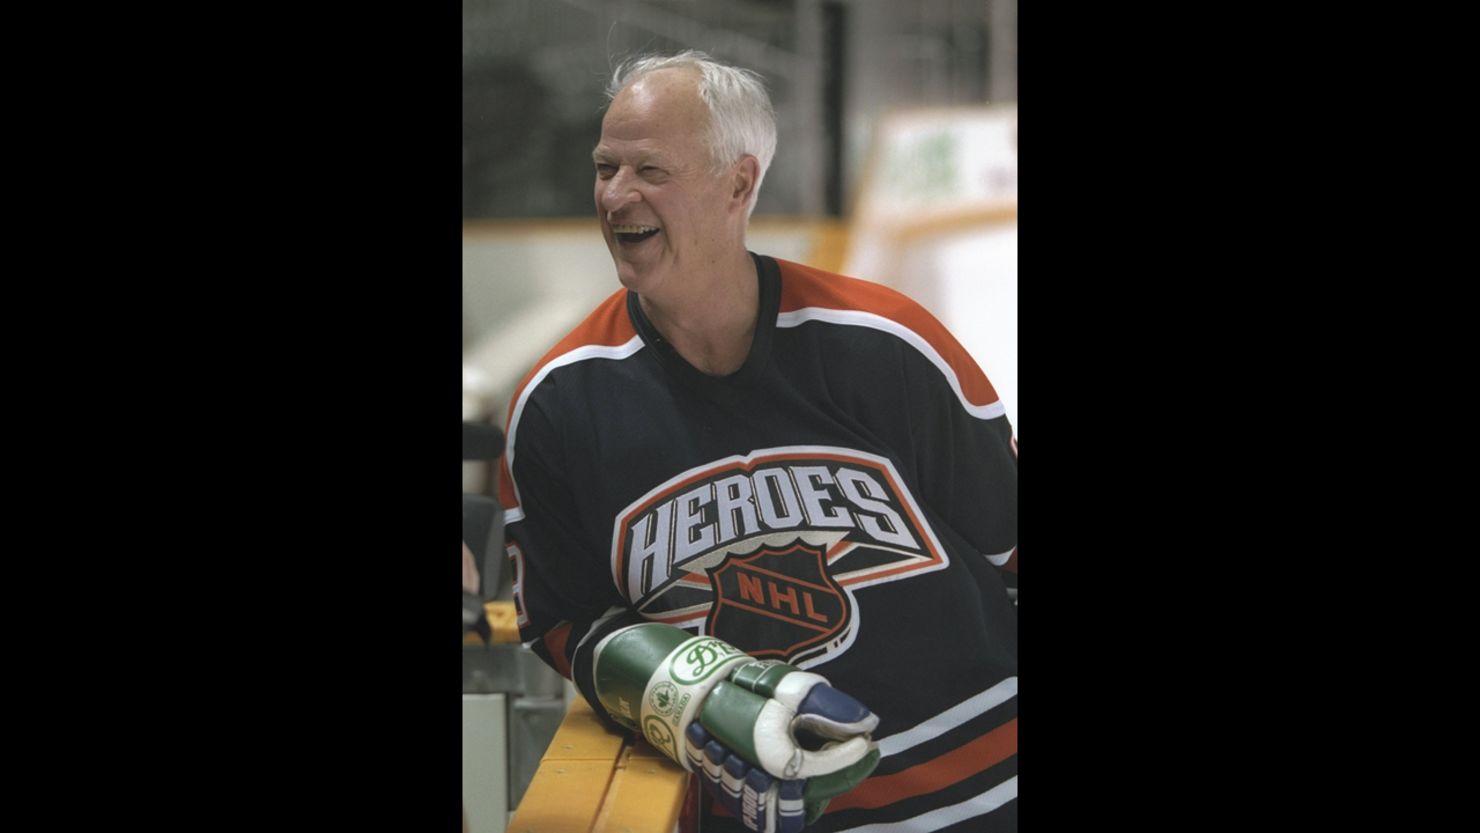 Gordie Howe scored 801 goals in his NHL career and is considered one of the best players of all time. 